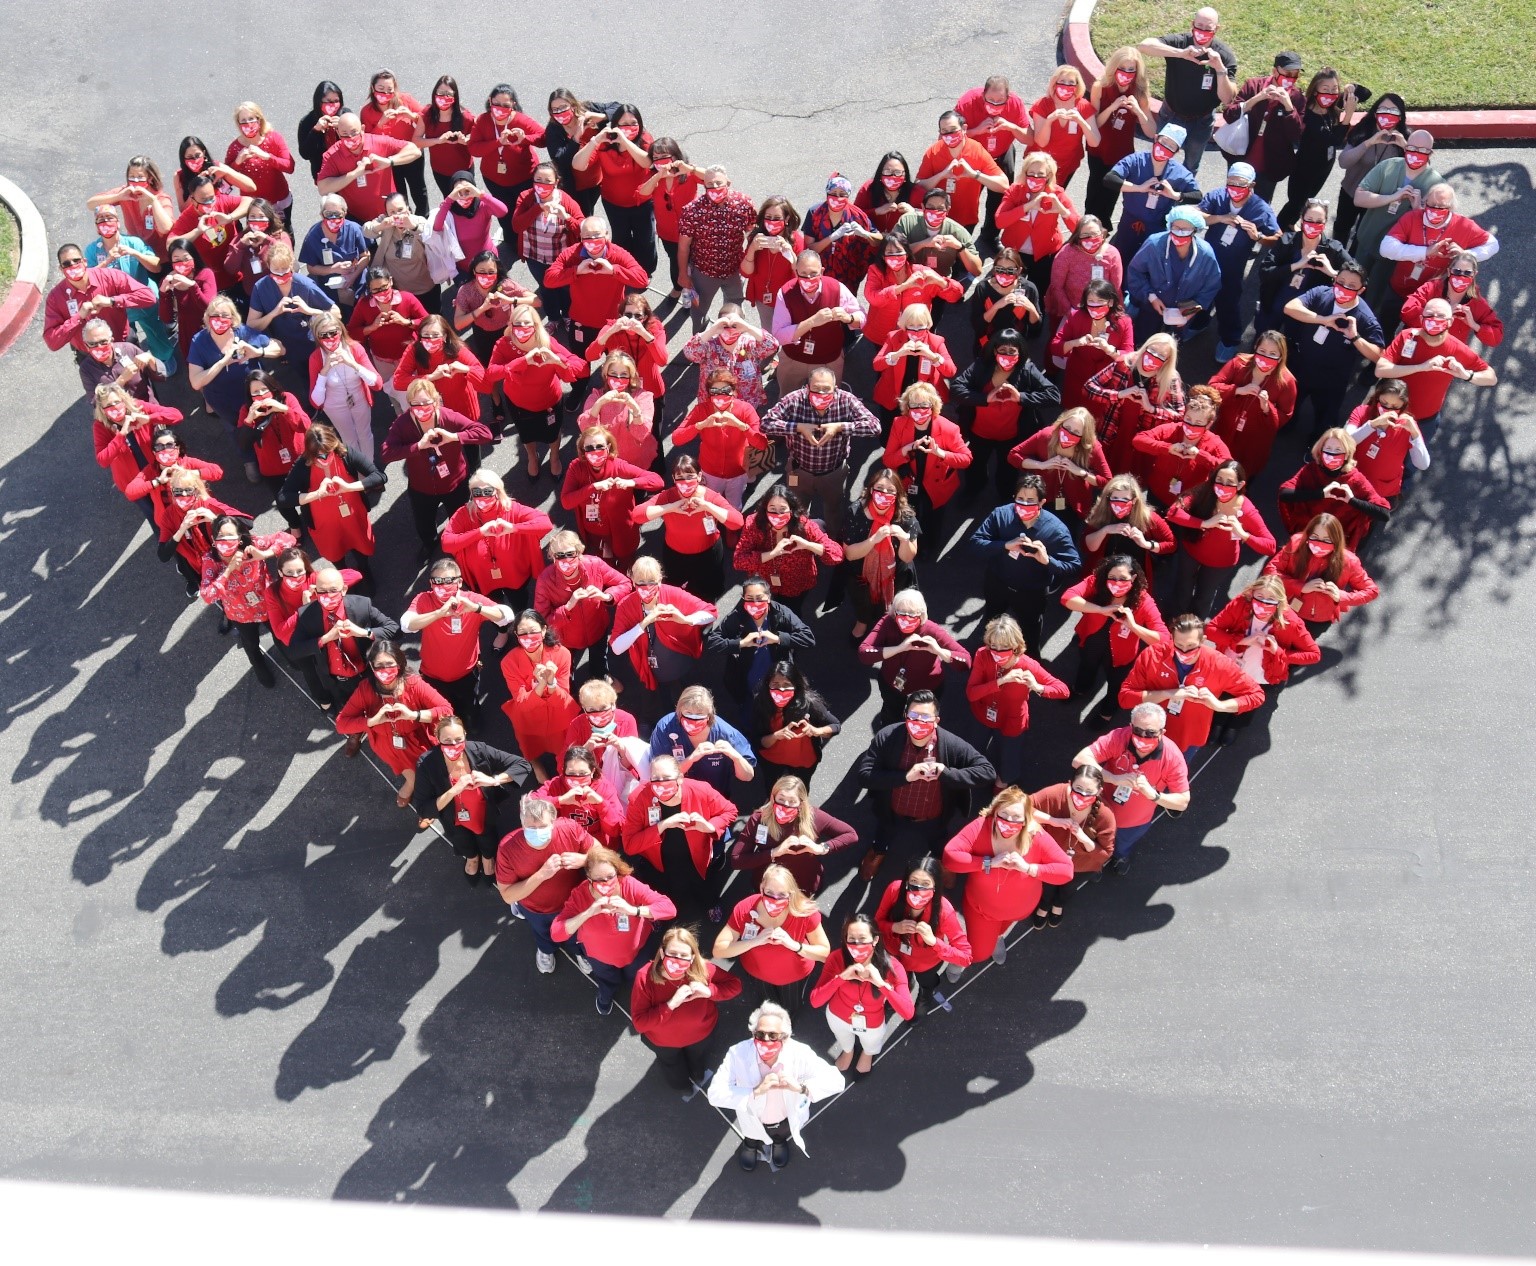 MemorialCare Saddleback Medical Center employees create a giant human heart to raise awareness of heart disease in women on National Wear Red Day.